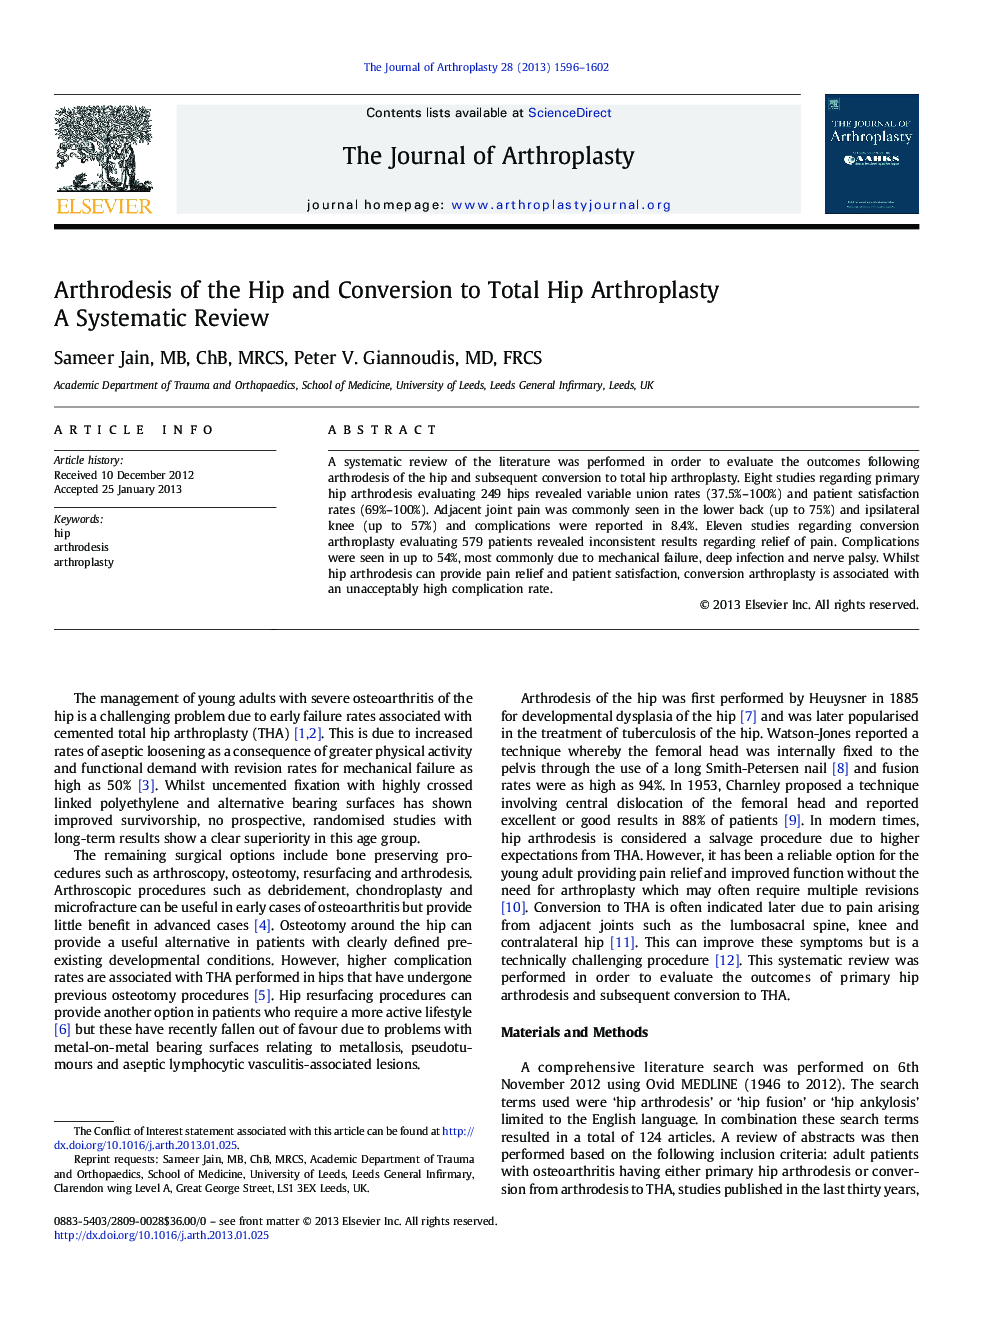 Arthrodesis of the Hip and Conversion to Total Hip Arthroplasty : A Systematic Review